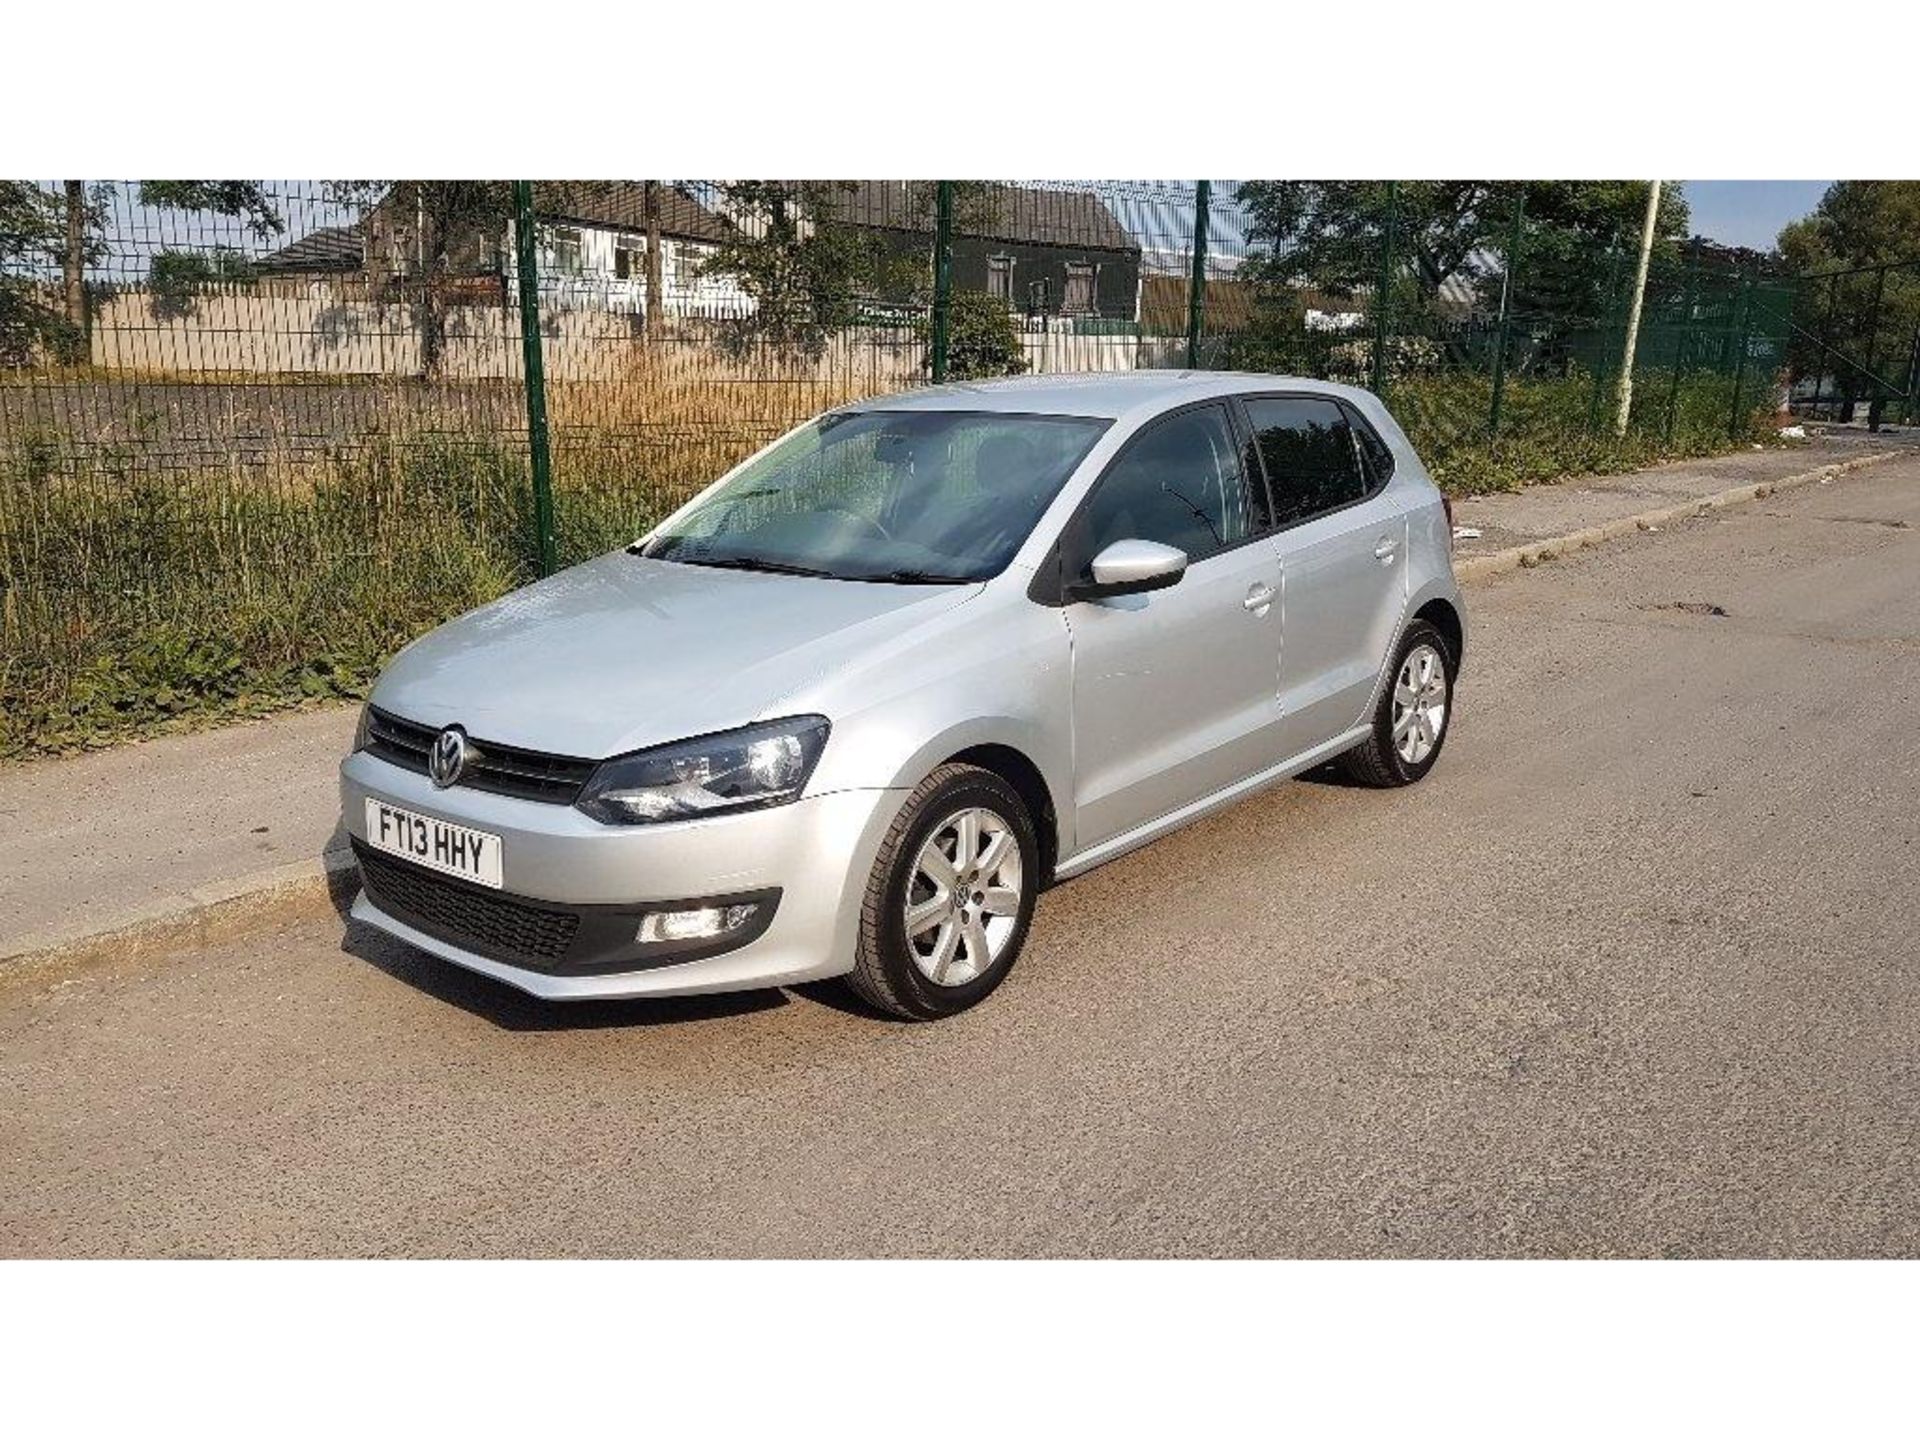 VOLKSWAGEN POLO 1.2 MATCH EDITION 5DR, FT13 HHY, 20.05.2013, PETROL, MILEAGE 28,499, MANUAL, 1.2L, 2 - Image 4 of 19